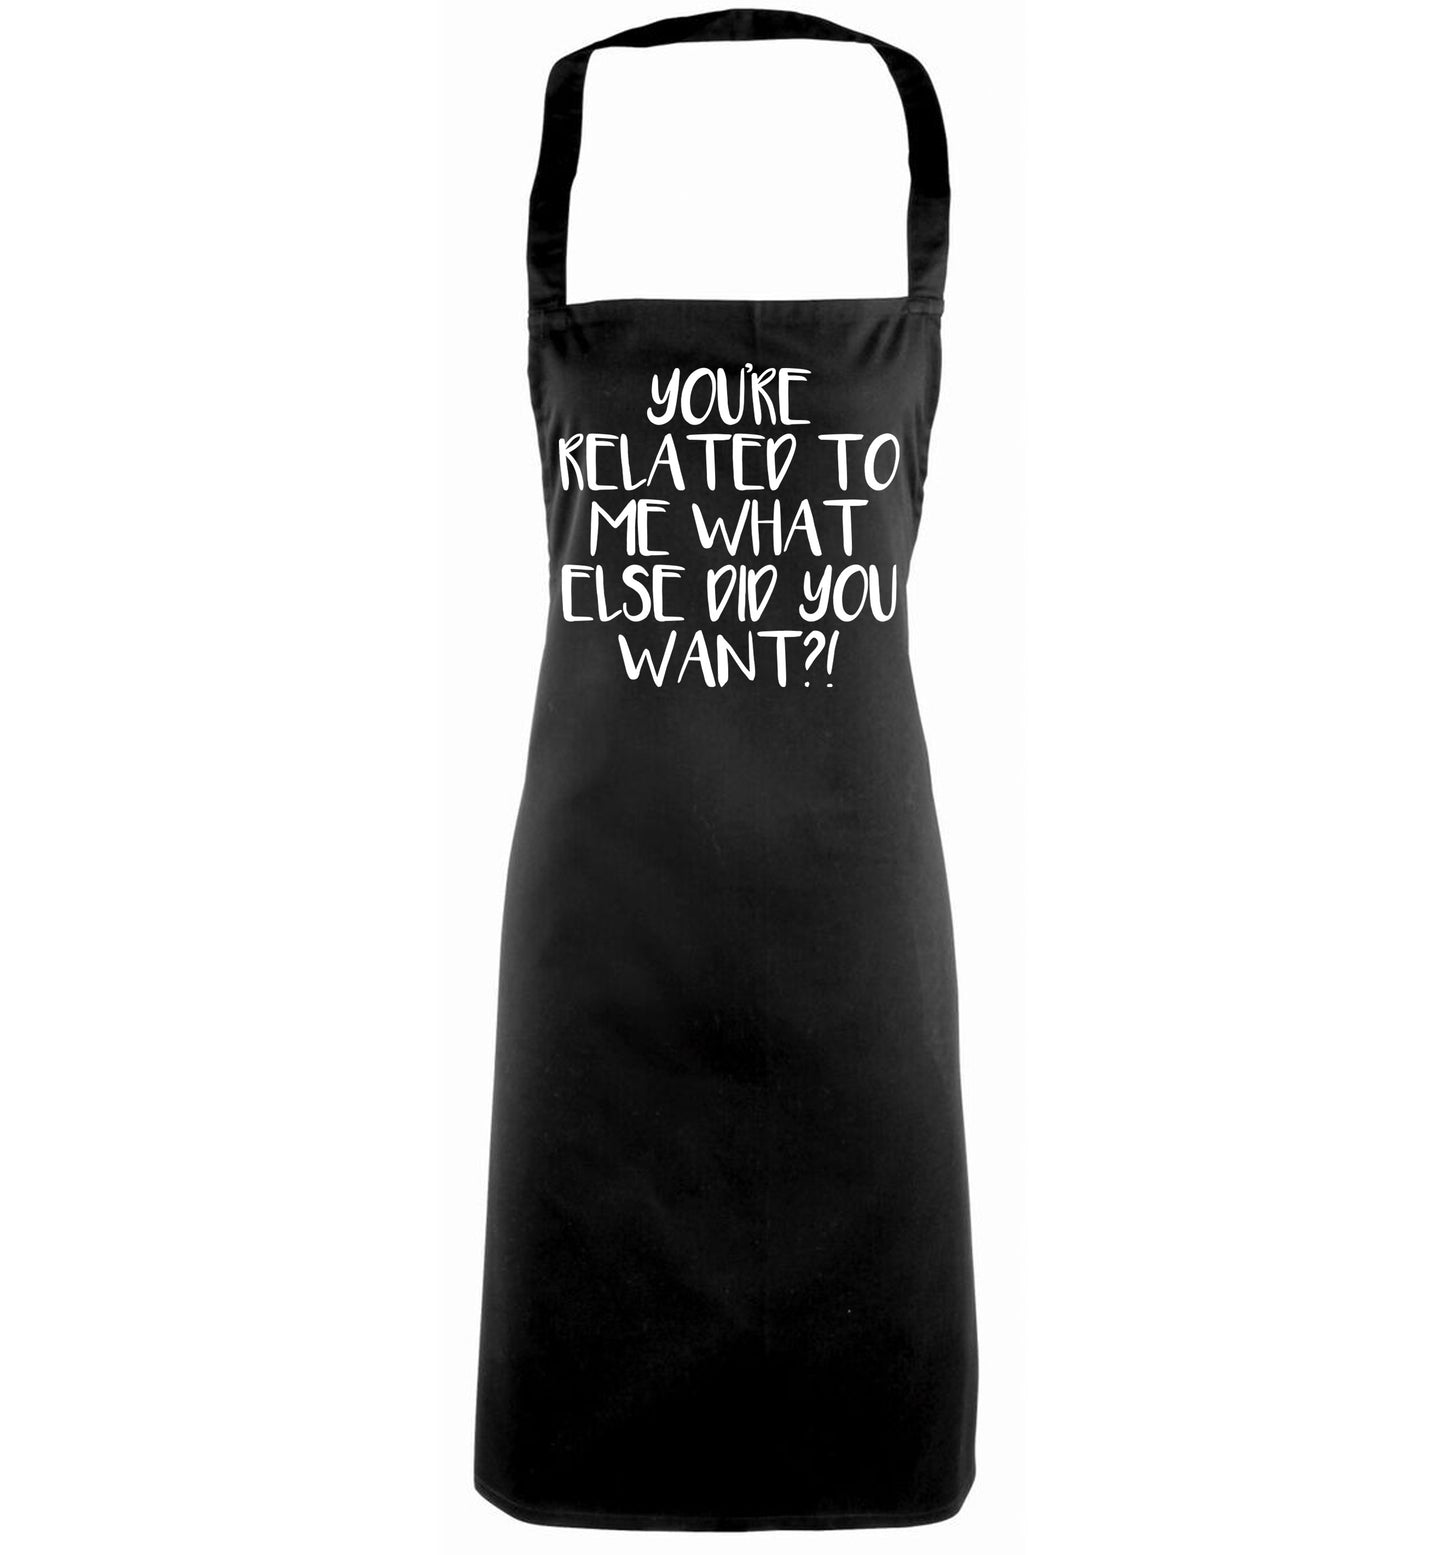 You're related to me what more do you want? black apron